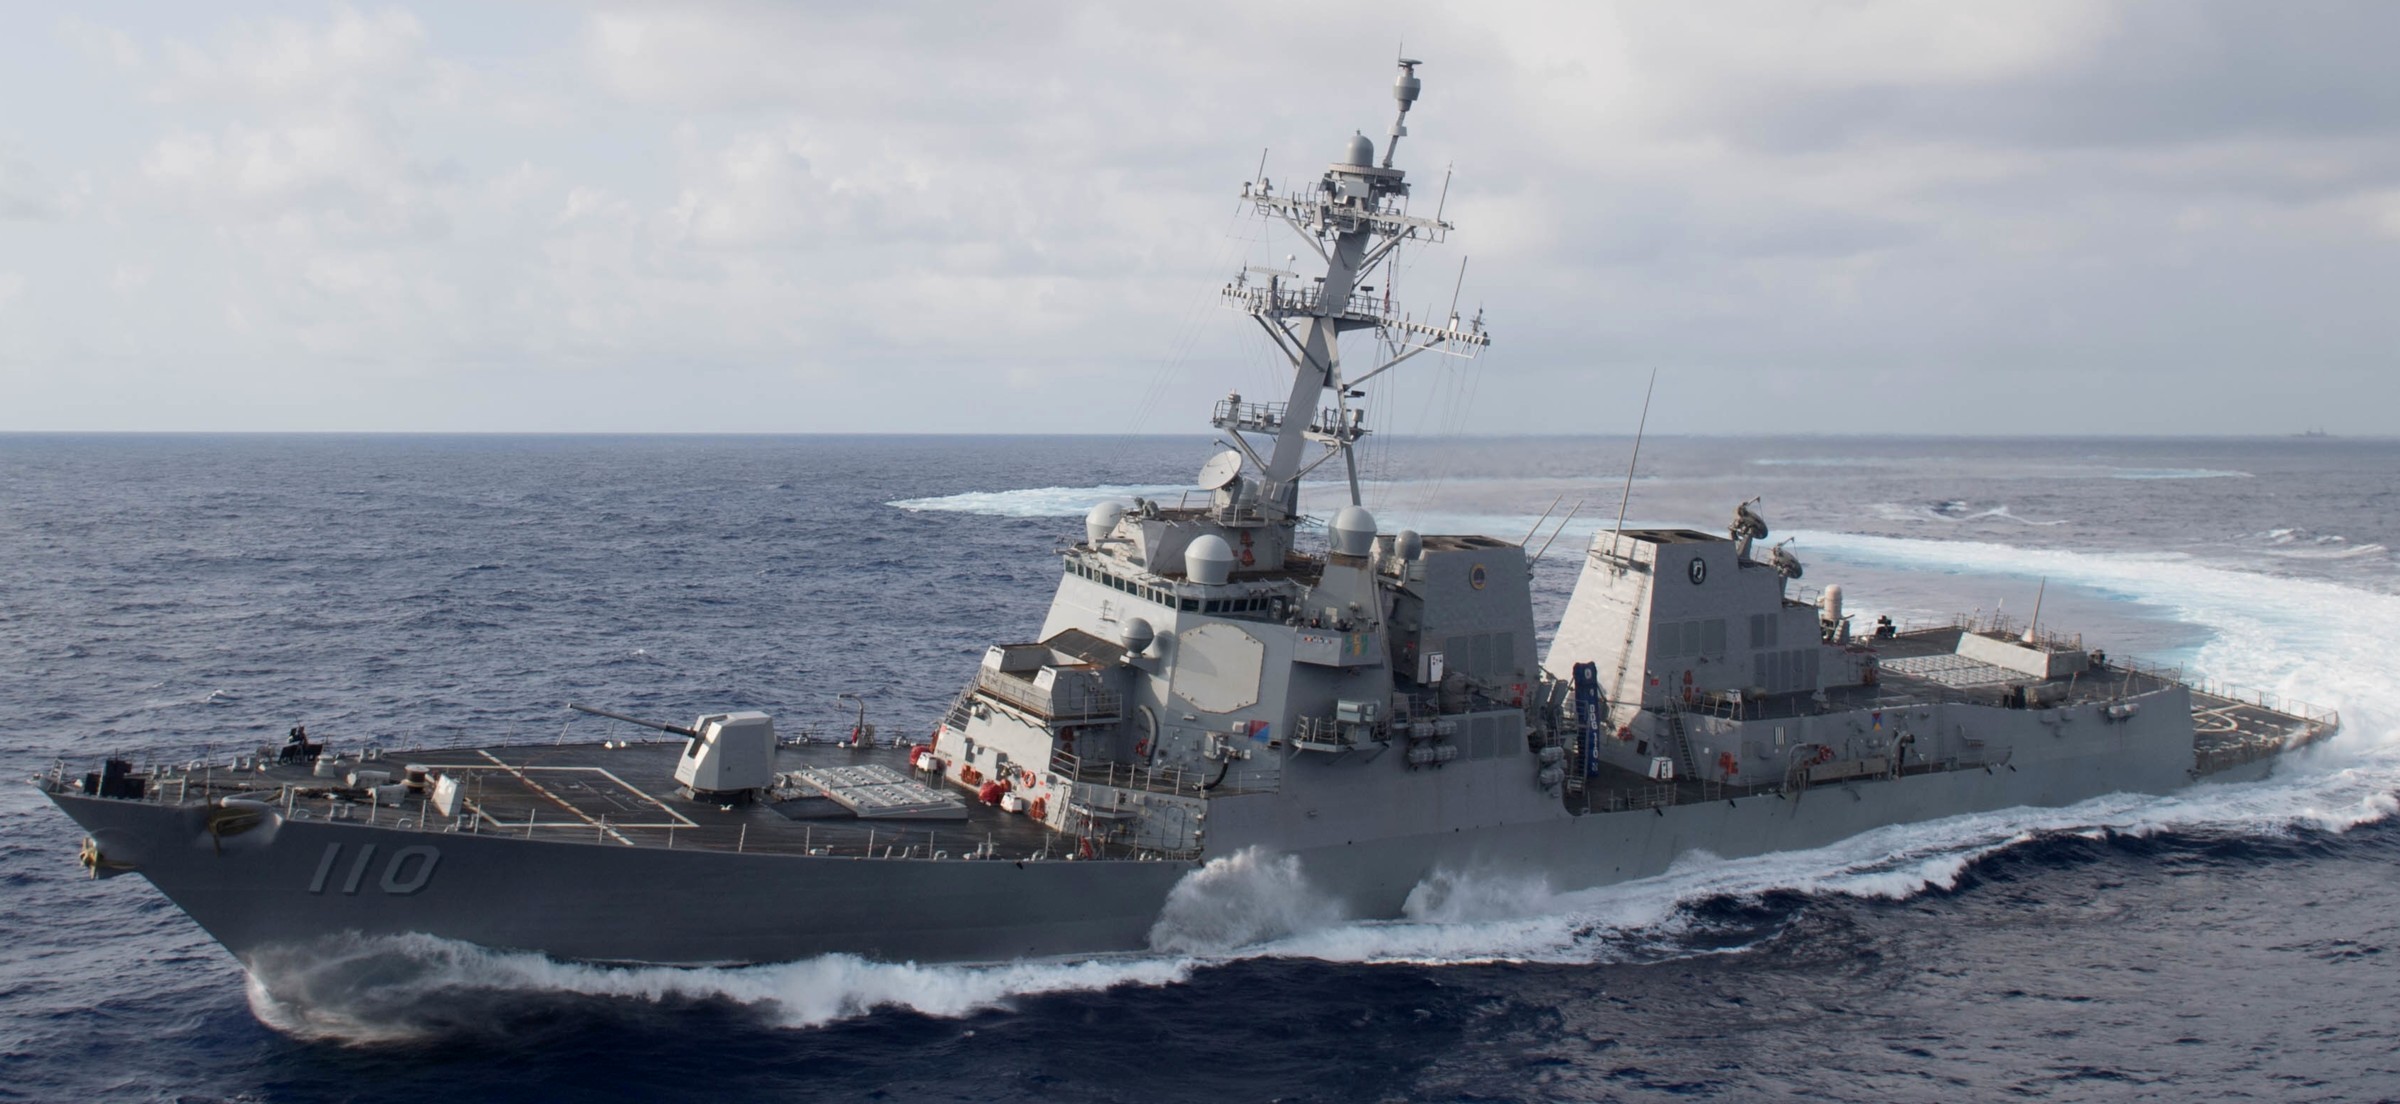 ddg-110 uss william p. lawrence arleigh burke class guided missile destroyer aegis us navy 37